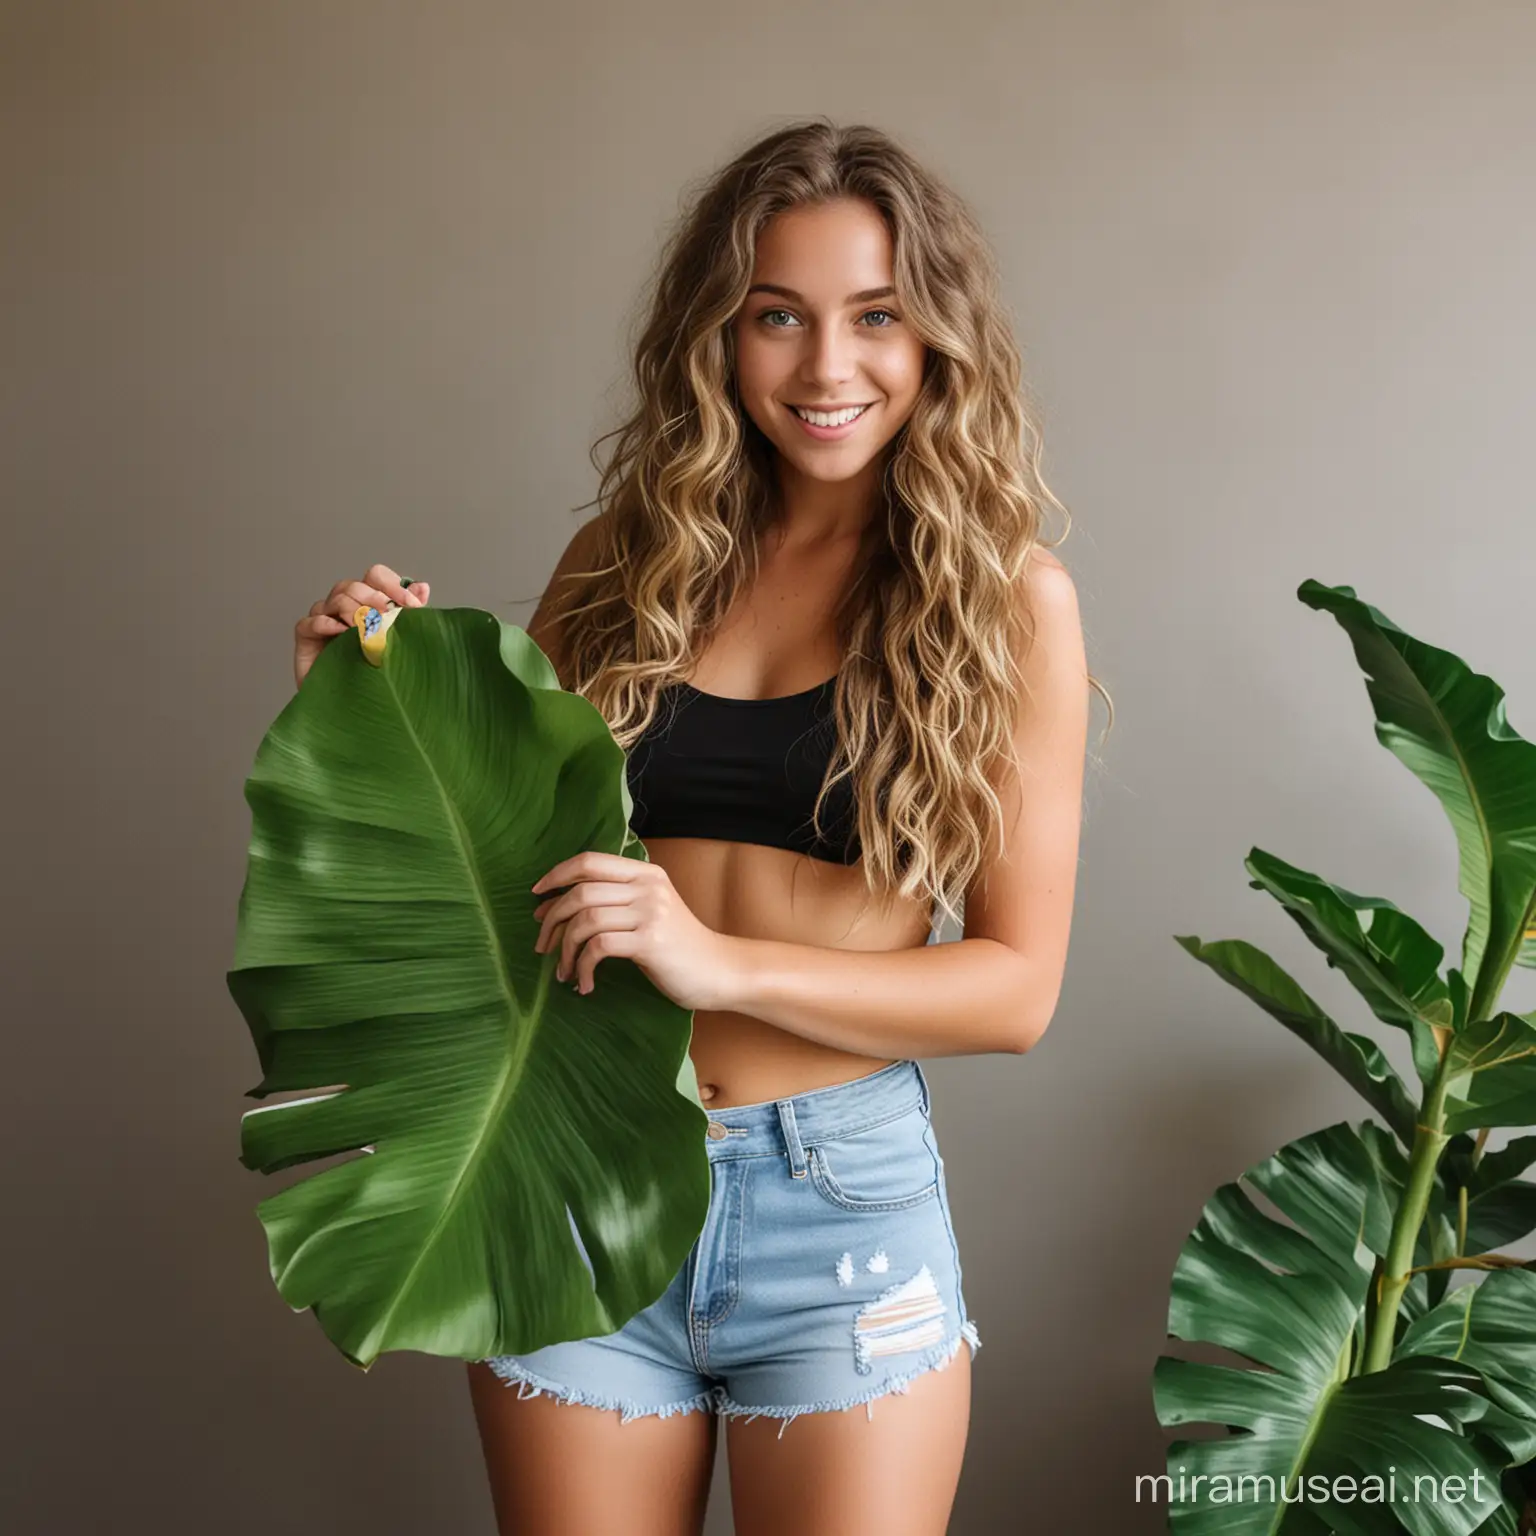 Young Girl with Wavy Hair Holding Banana Leaf Outdoors